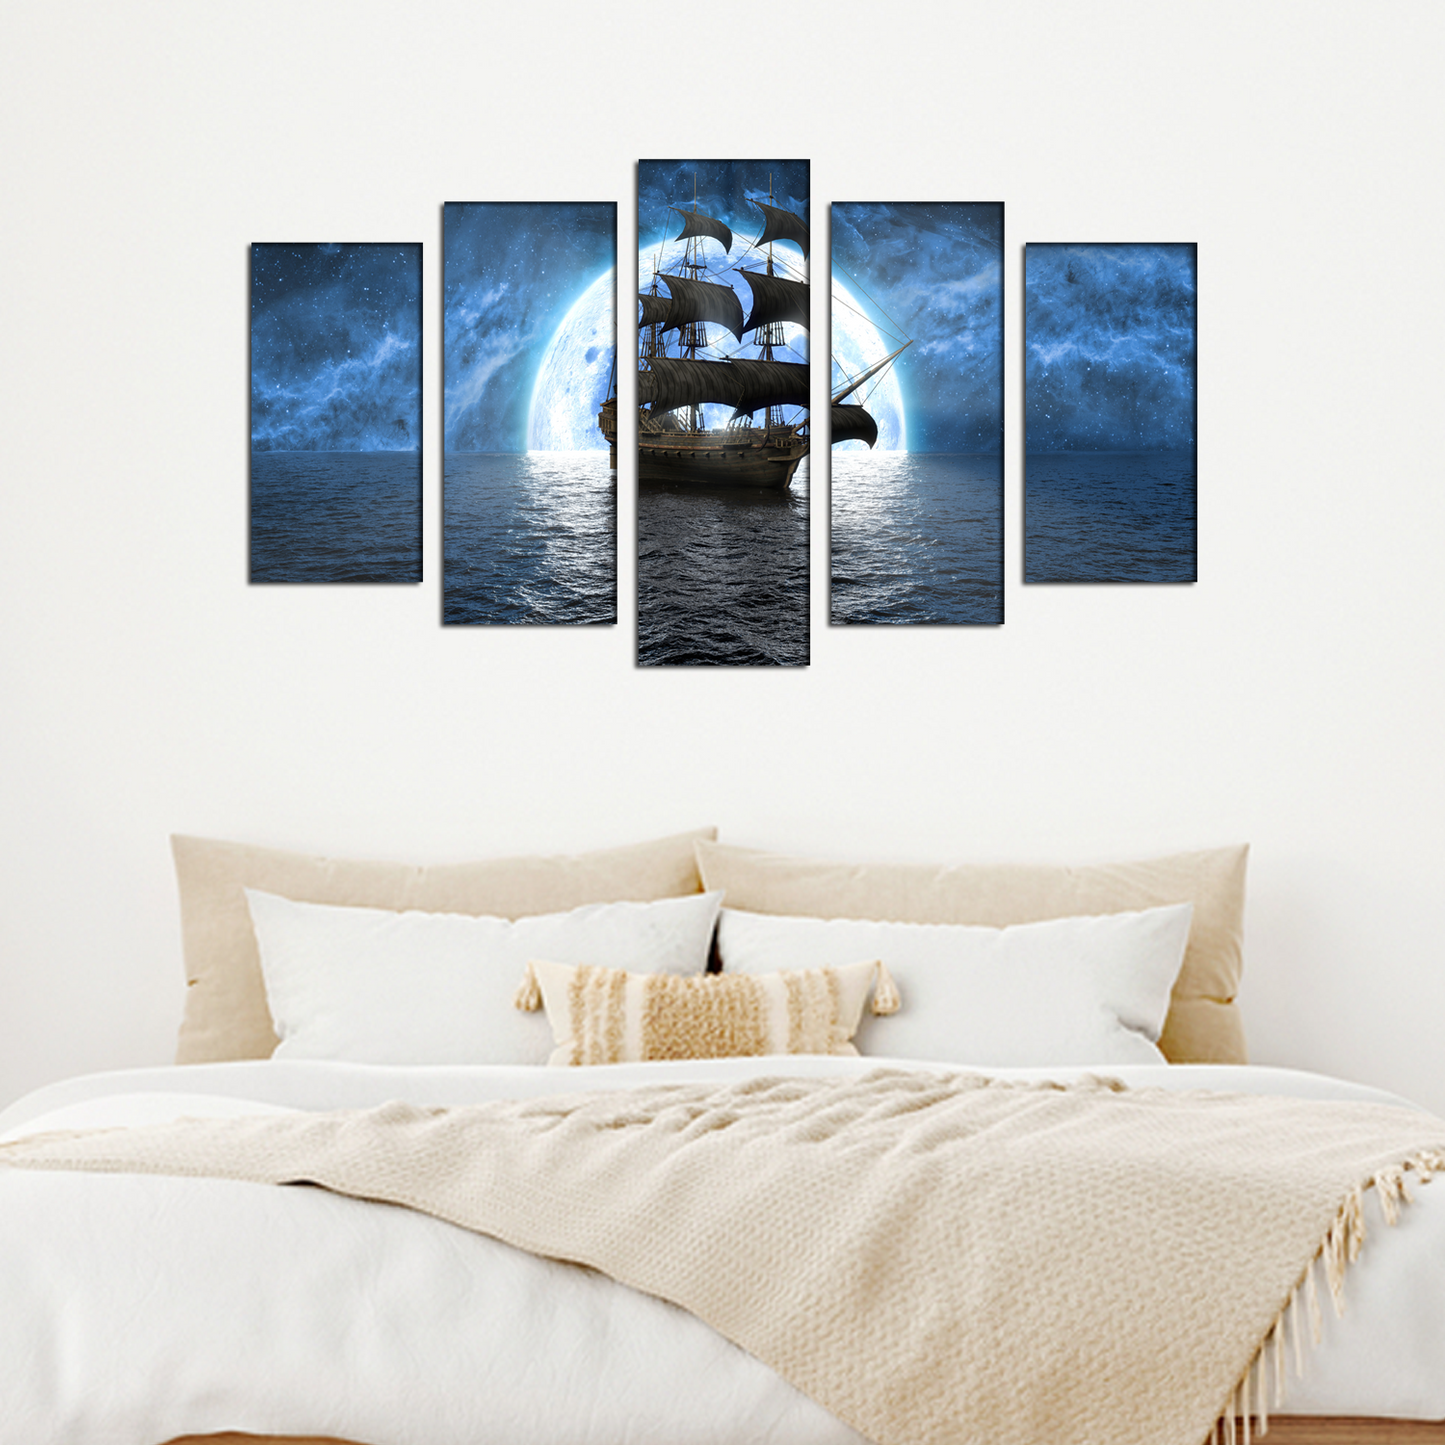 Ship at Sea with Large Moon MDF Panel Painting